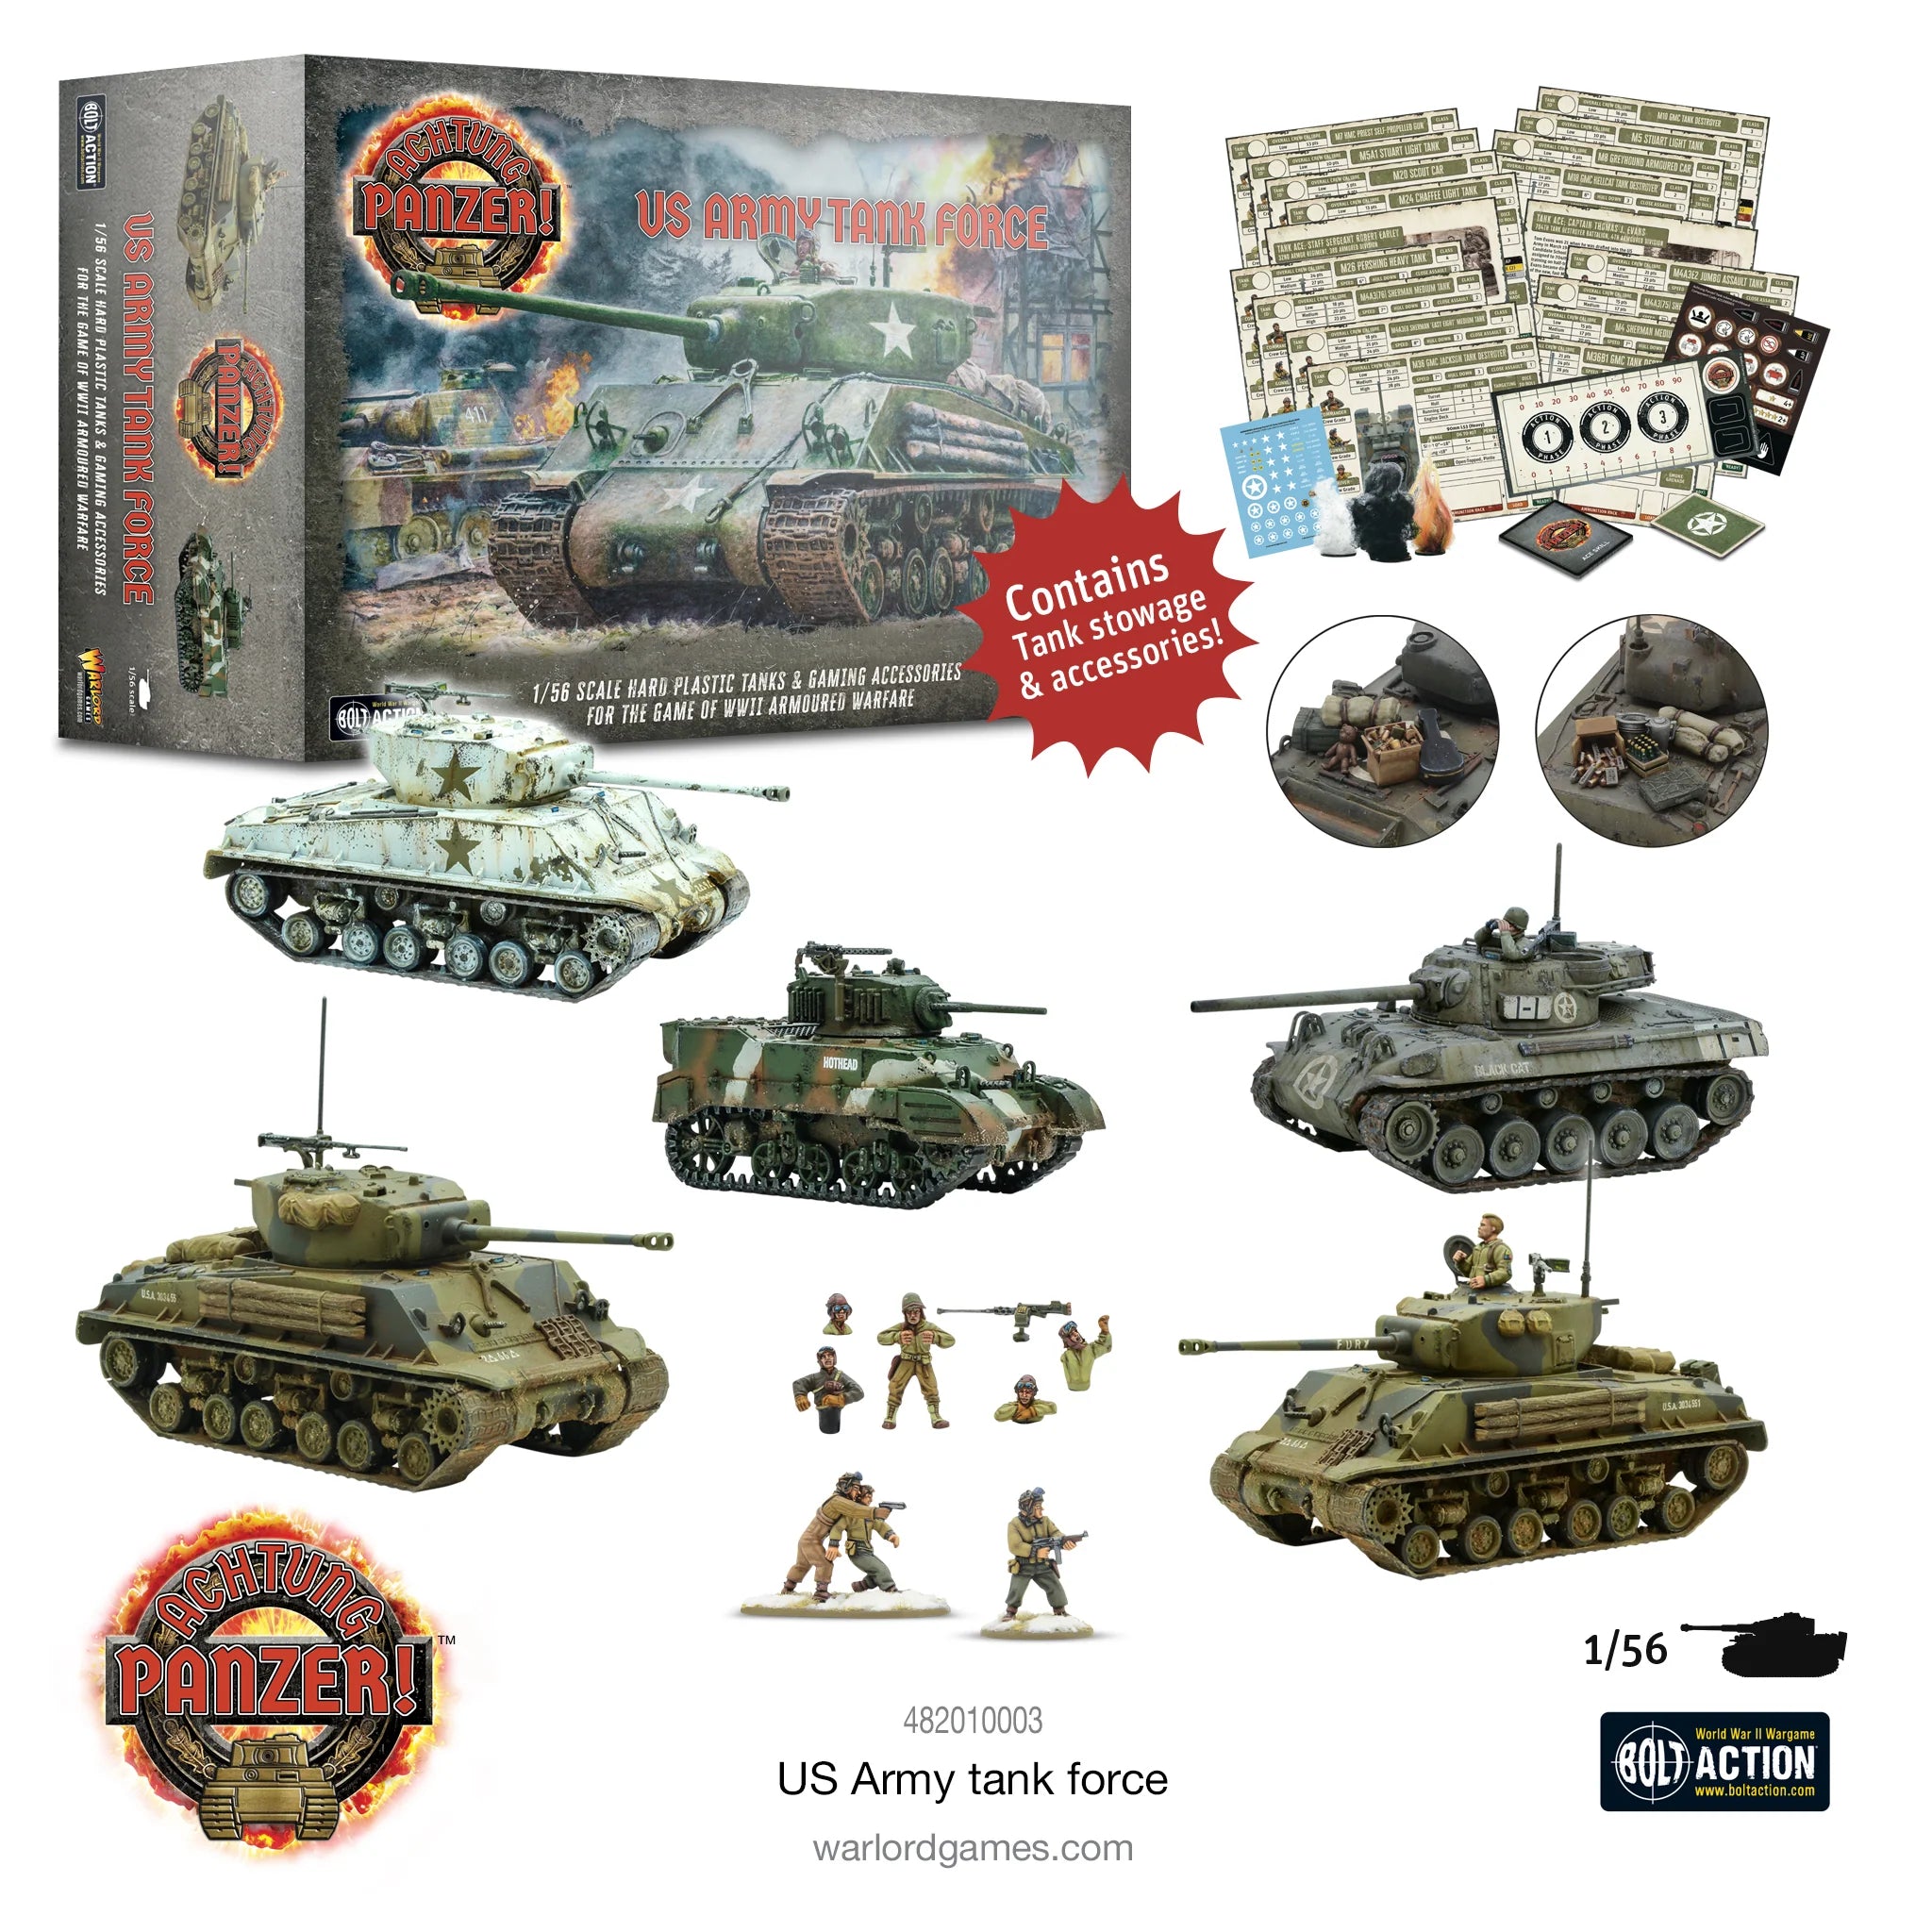 Achtung Panzer!: US Army Tank Force [New] | Yard's Games Ltd